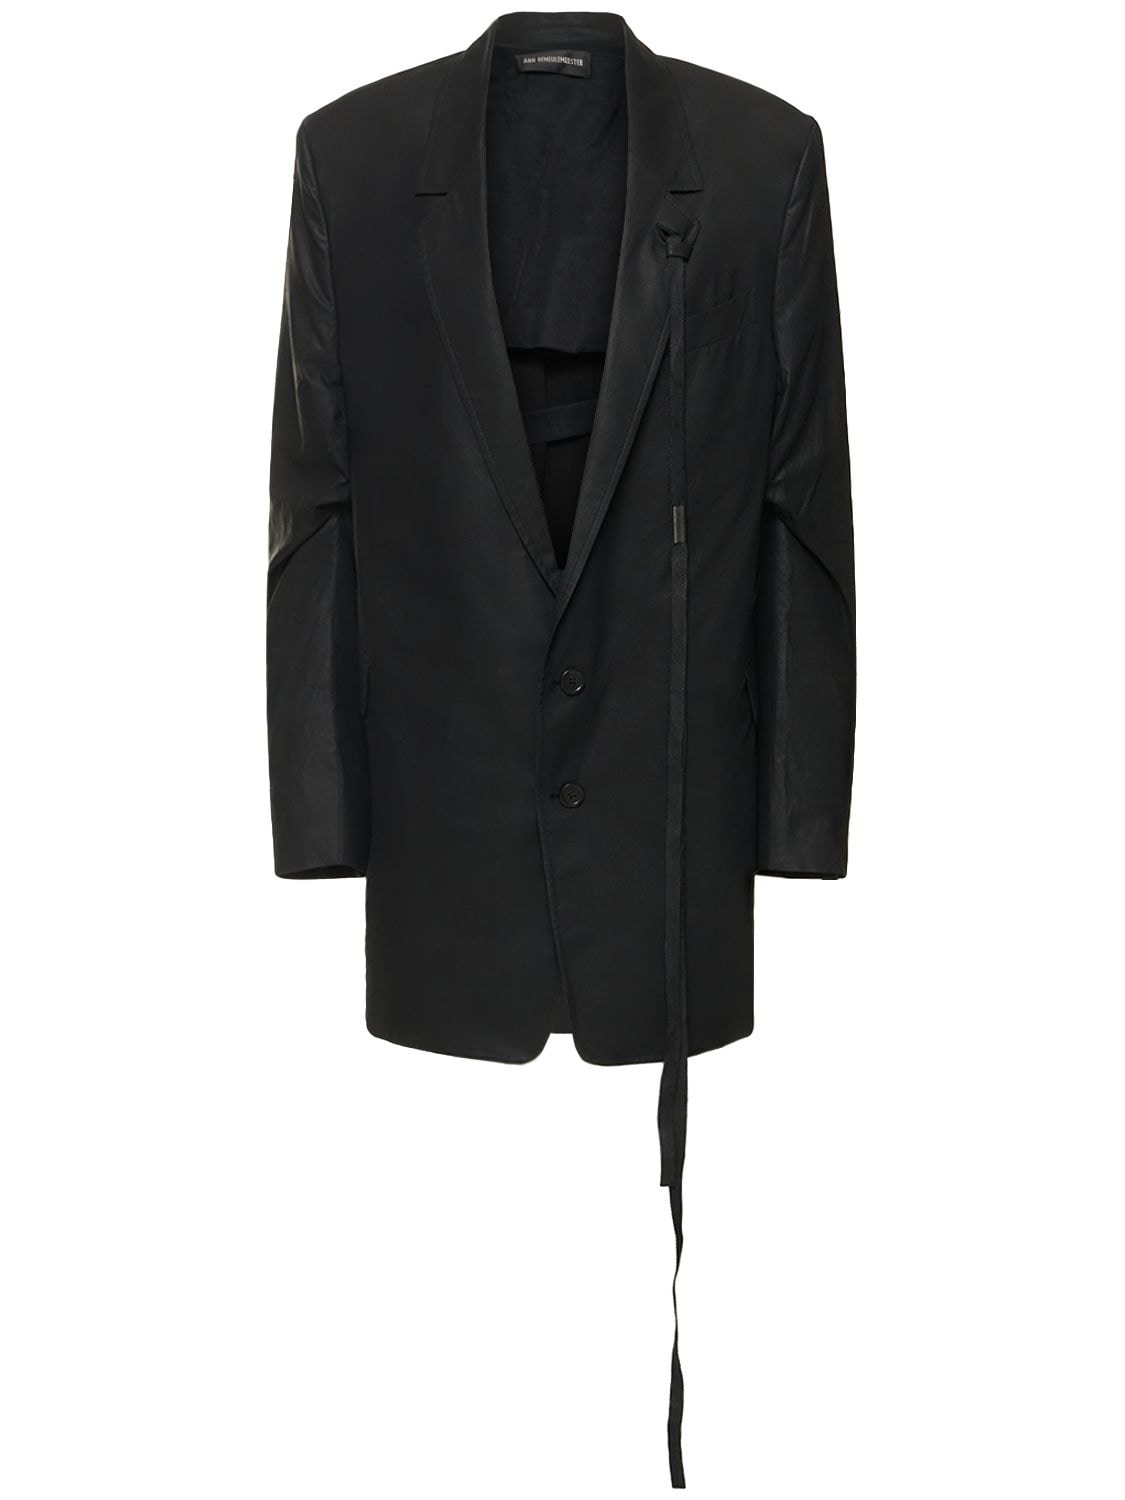 ANN DEMEULEMEESTER AGNES WAXED COTTON VOILE SLOUCHY JACKET